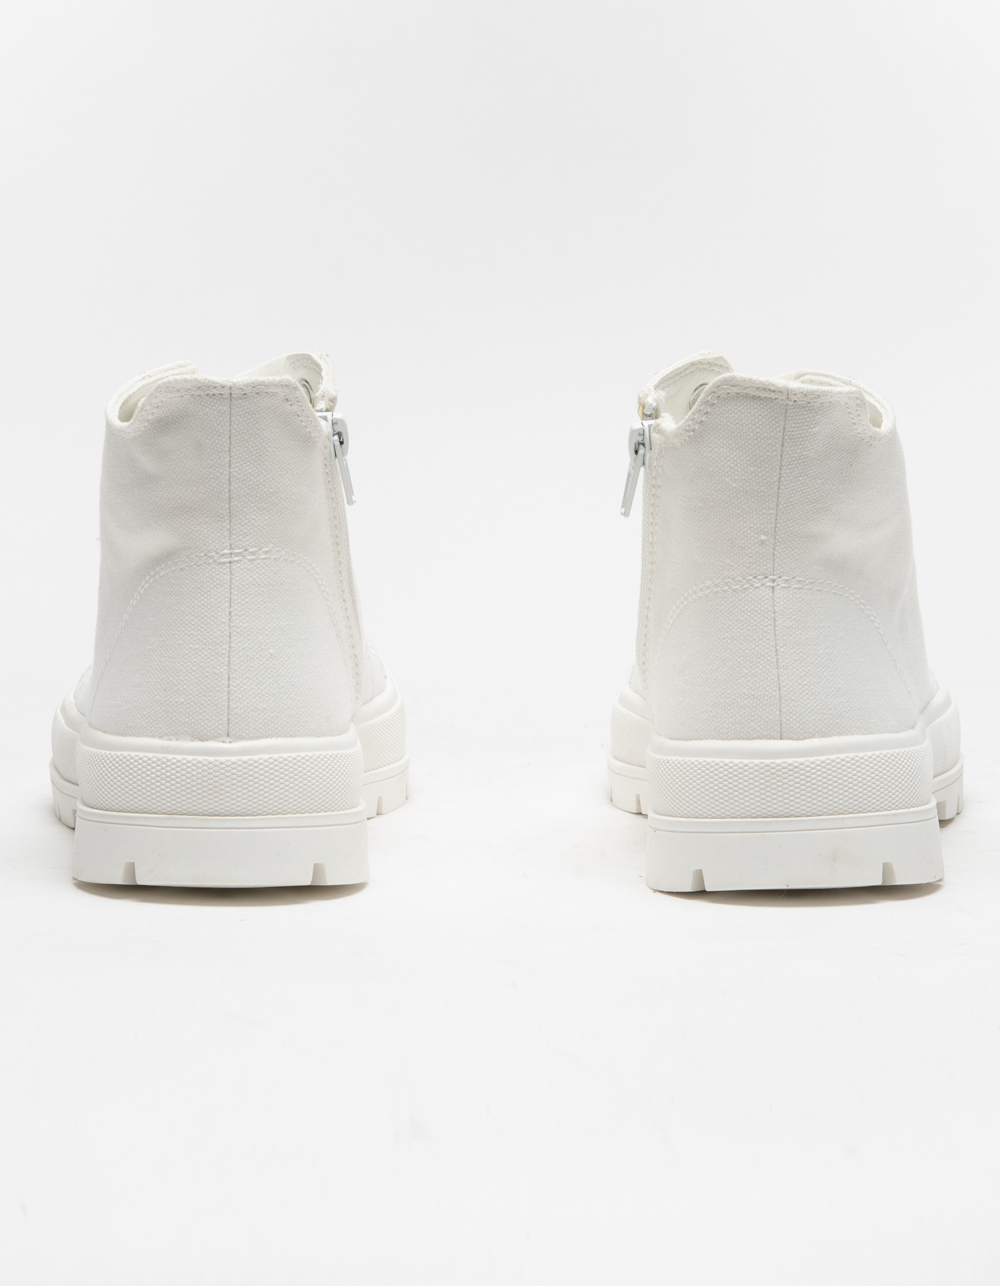 SODA Womens Lug Canvas Boots - WHITE | Tillys